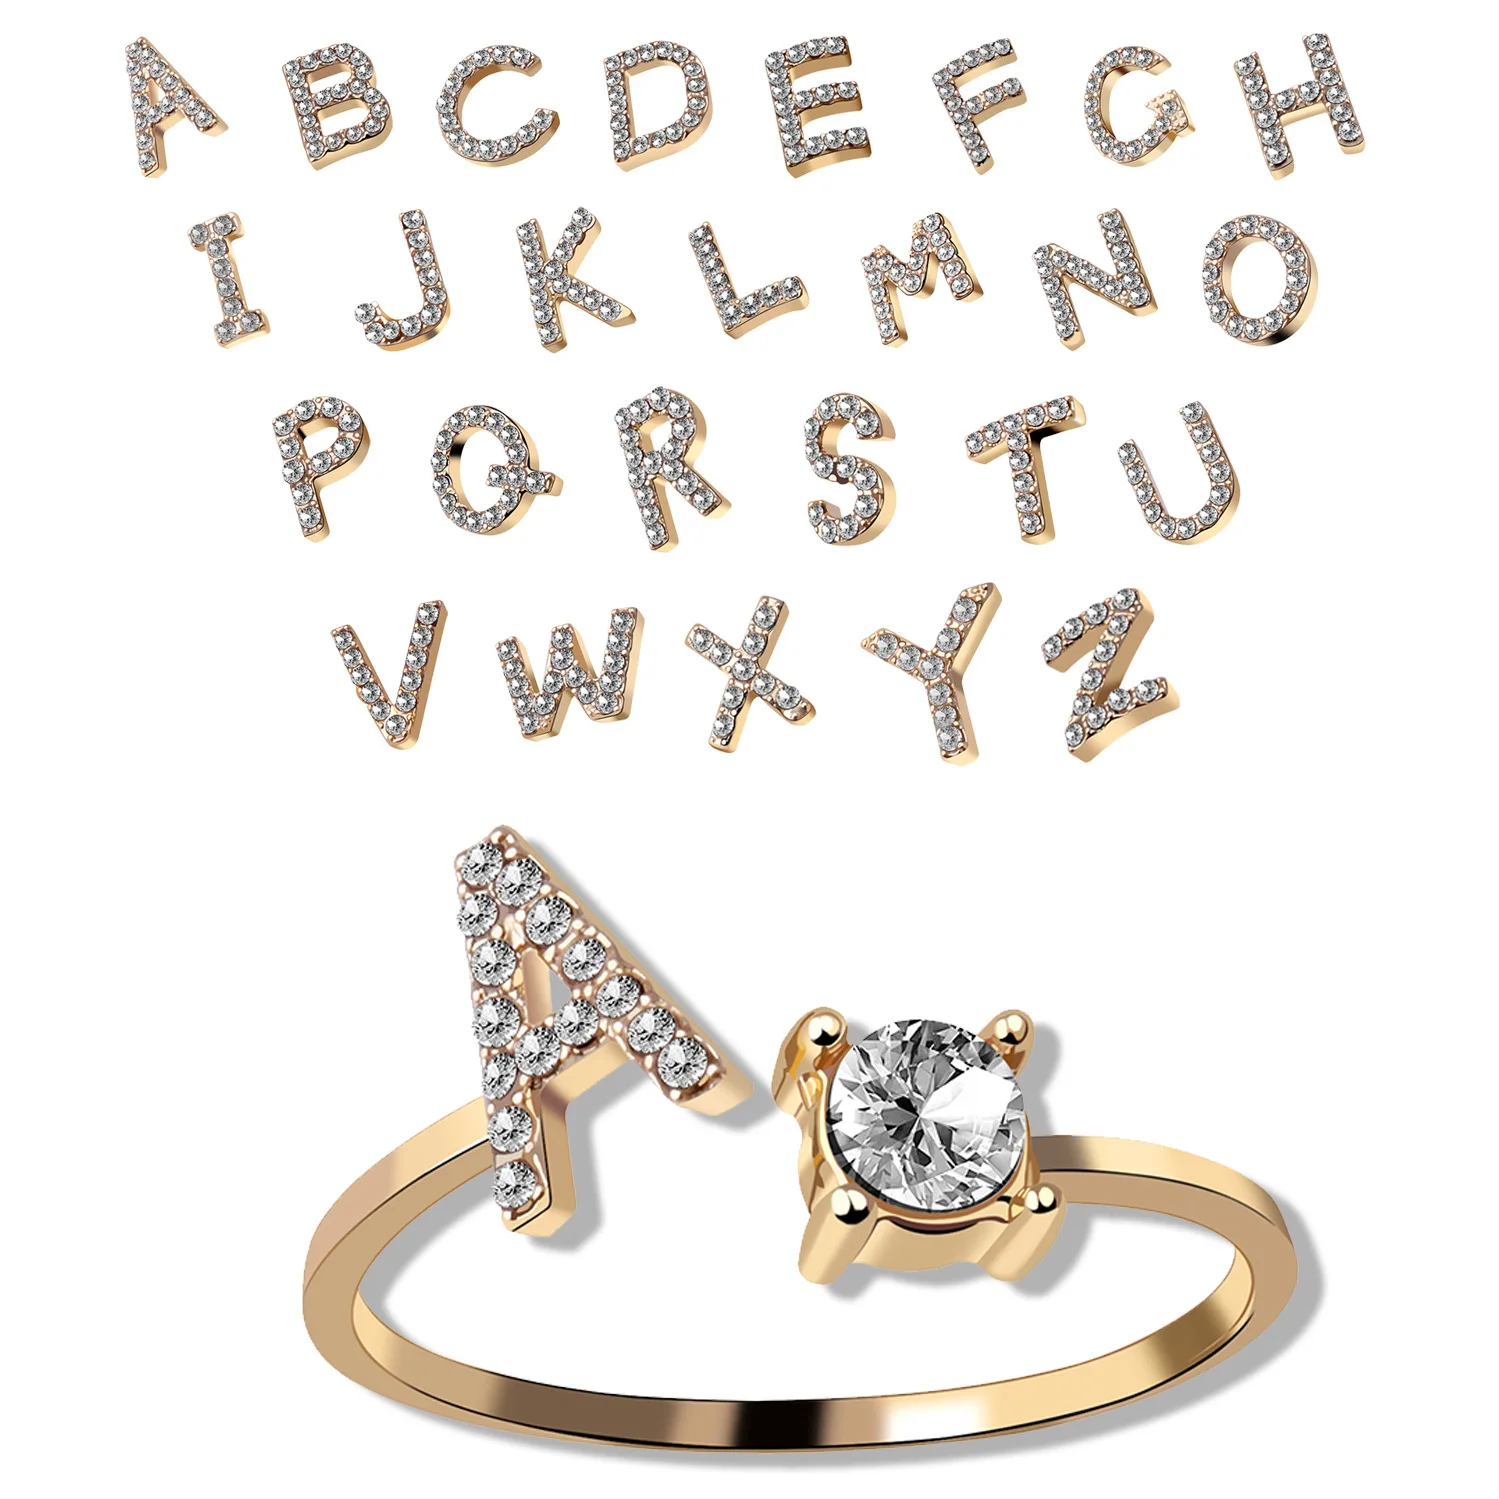 

A-Z Letter Gold Color Metal Adjustable Opening Ring Initials Name Alphabet Female Creative Finger Rings Trendy Party Jewelry, Gold/silver